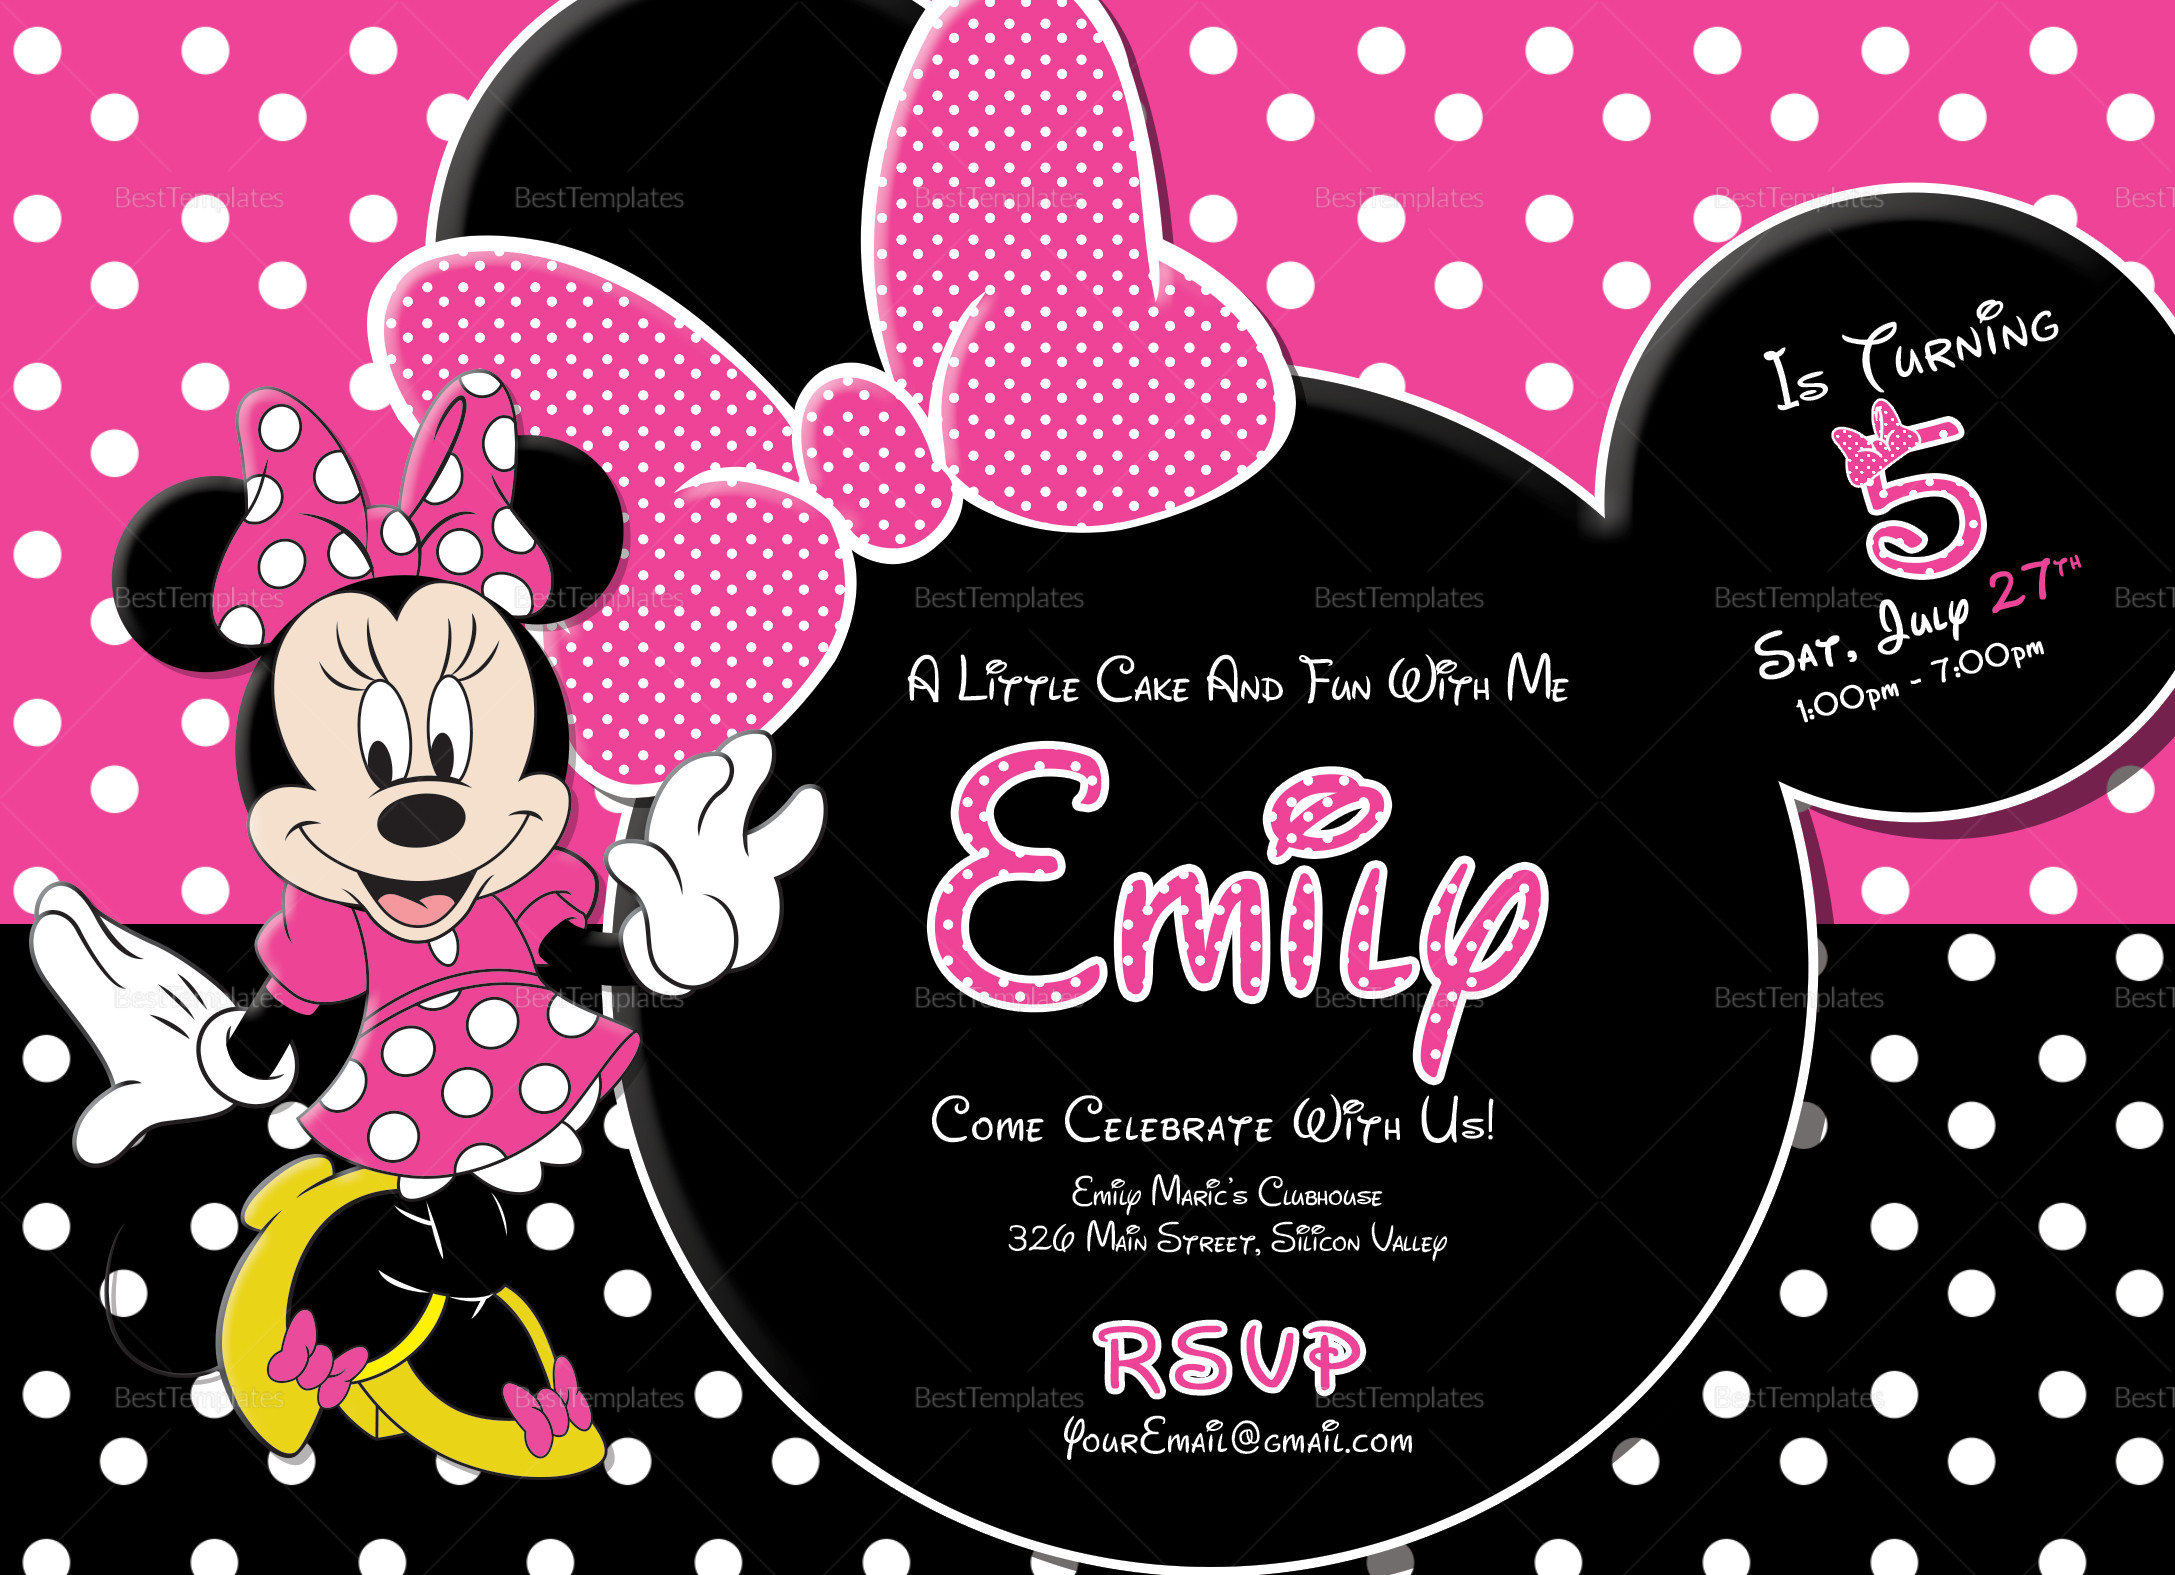 Minnie Mouse Birthday Party Invitations
 Special Minnie Mouse Birthday Invitation Design Template